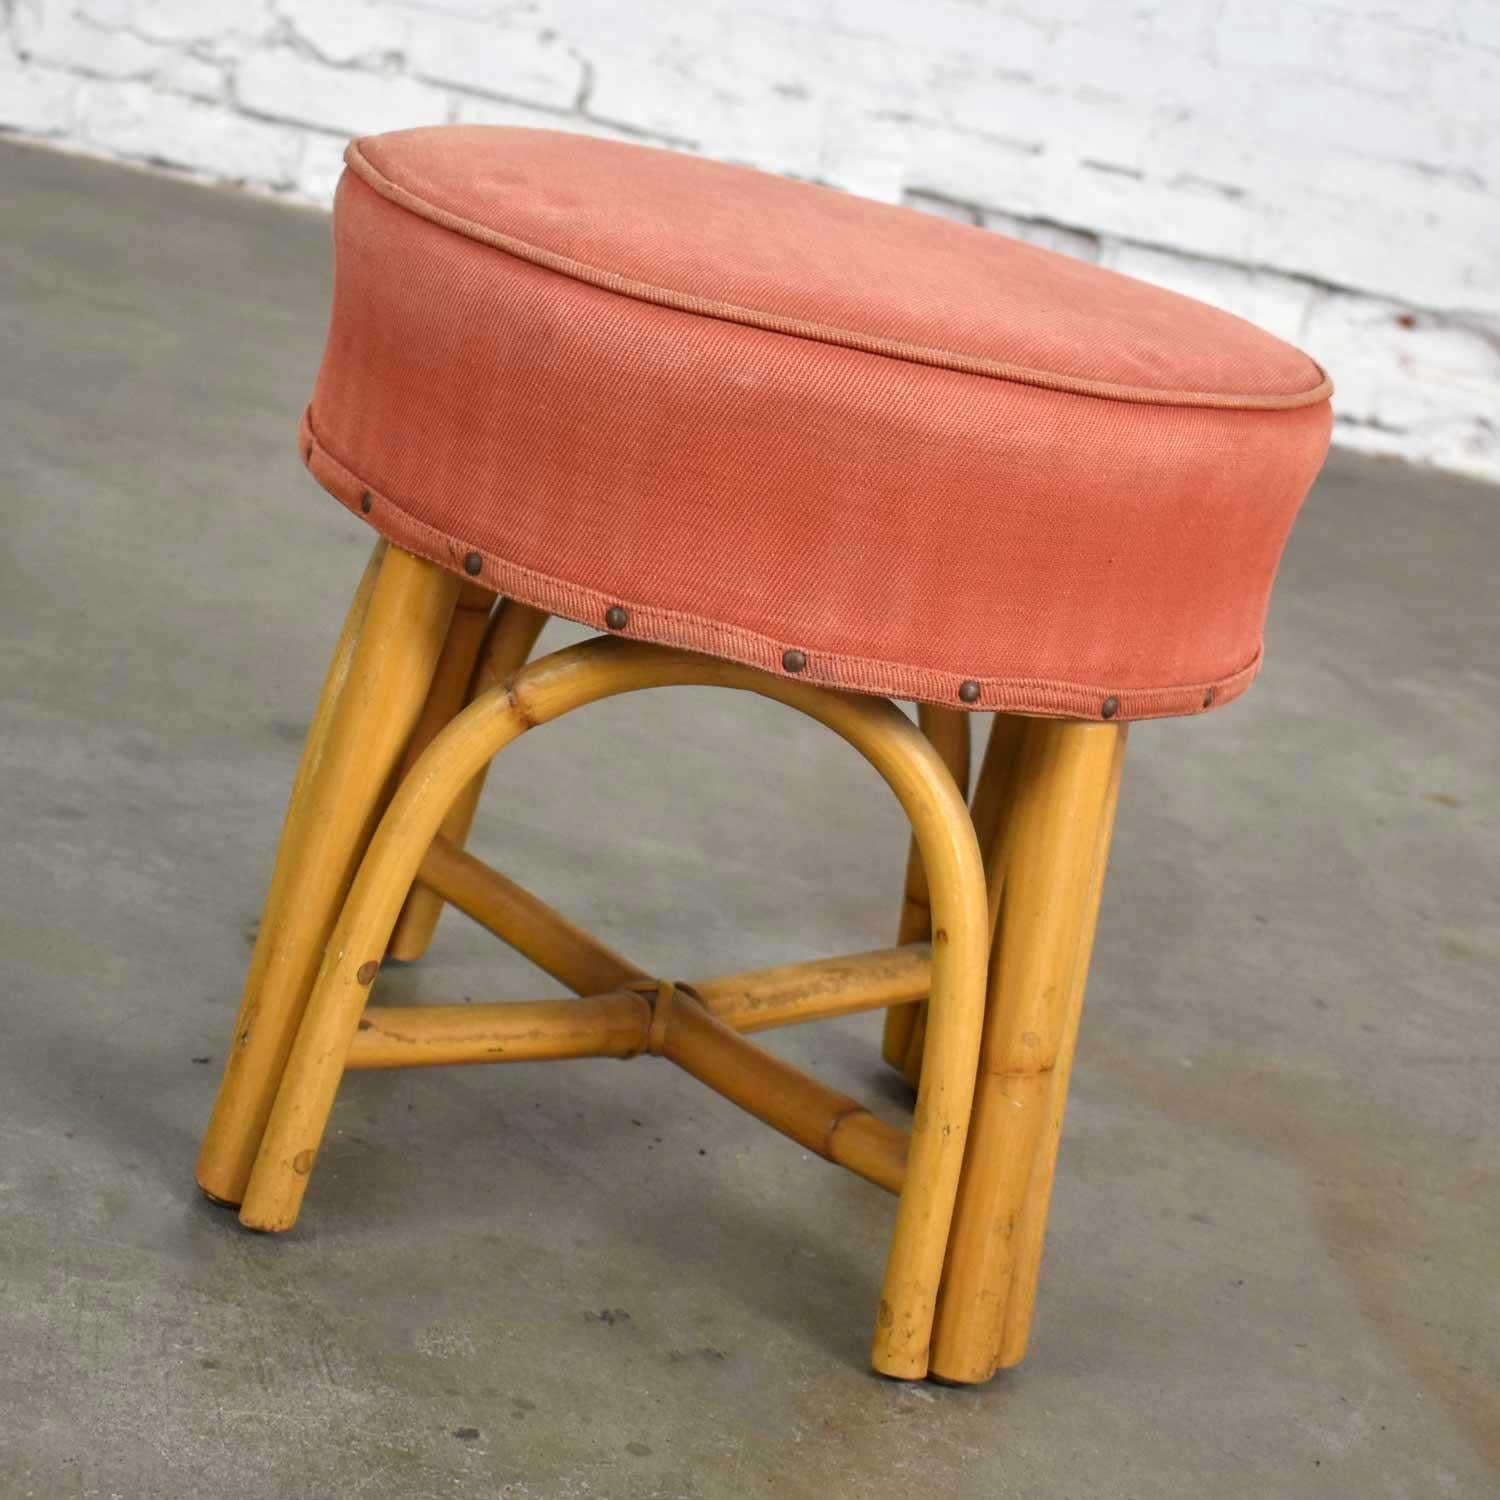 Handsome low foot stool, ottoman, or tuffet in its original upholstered top of perfectly faded terracotta colored gaberdine. It is in wonderful vintage condition. We have restored the rattan finish and shampooed the upholstered top. We love its